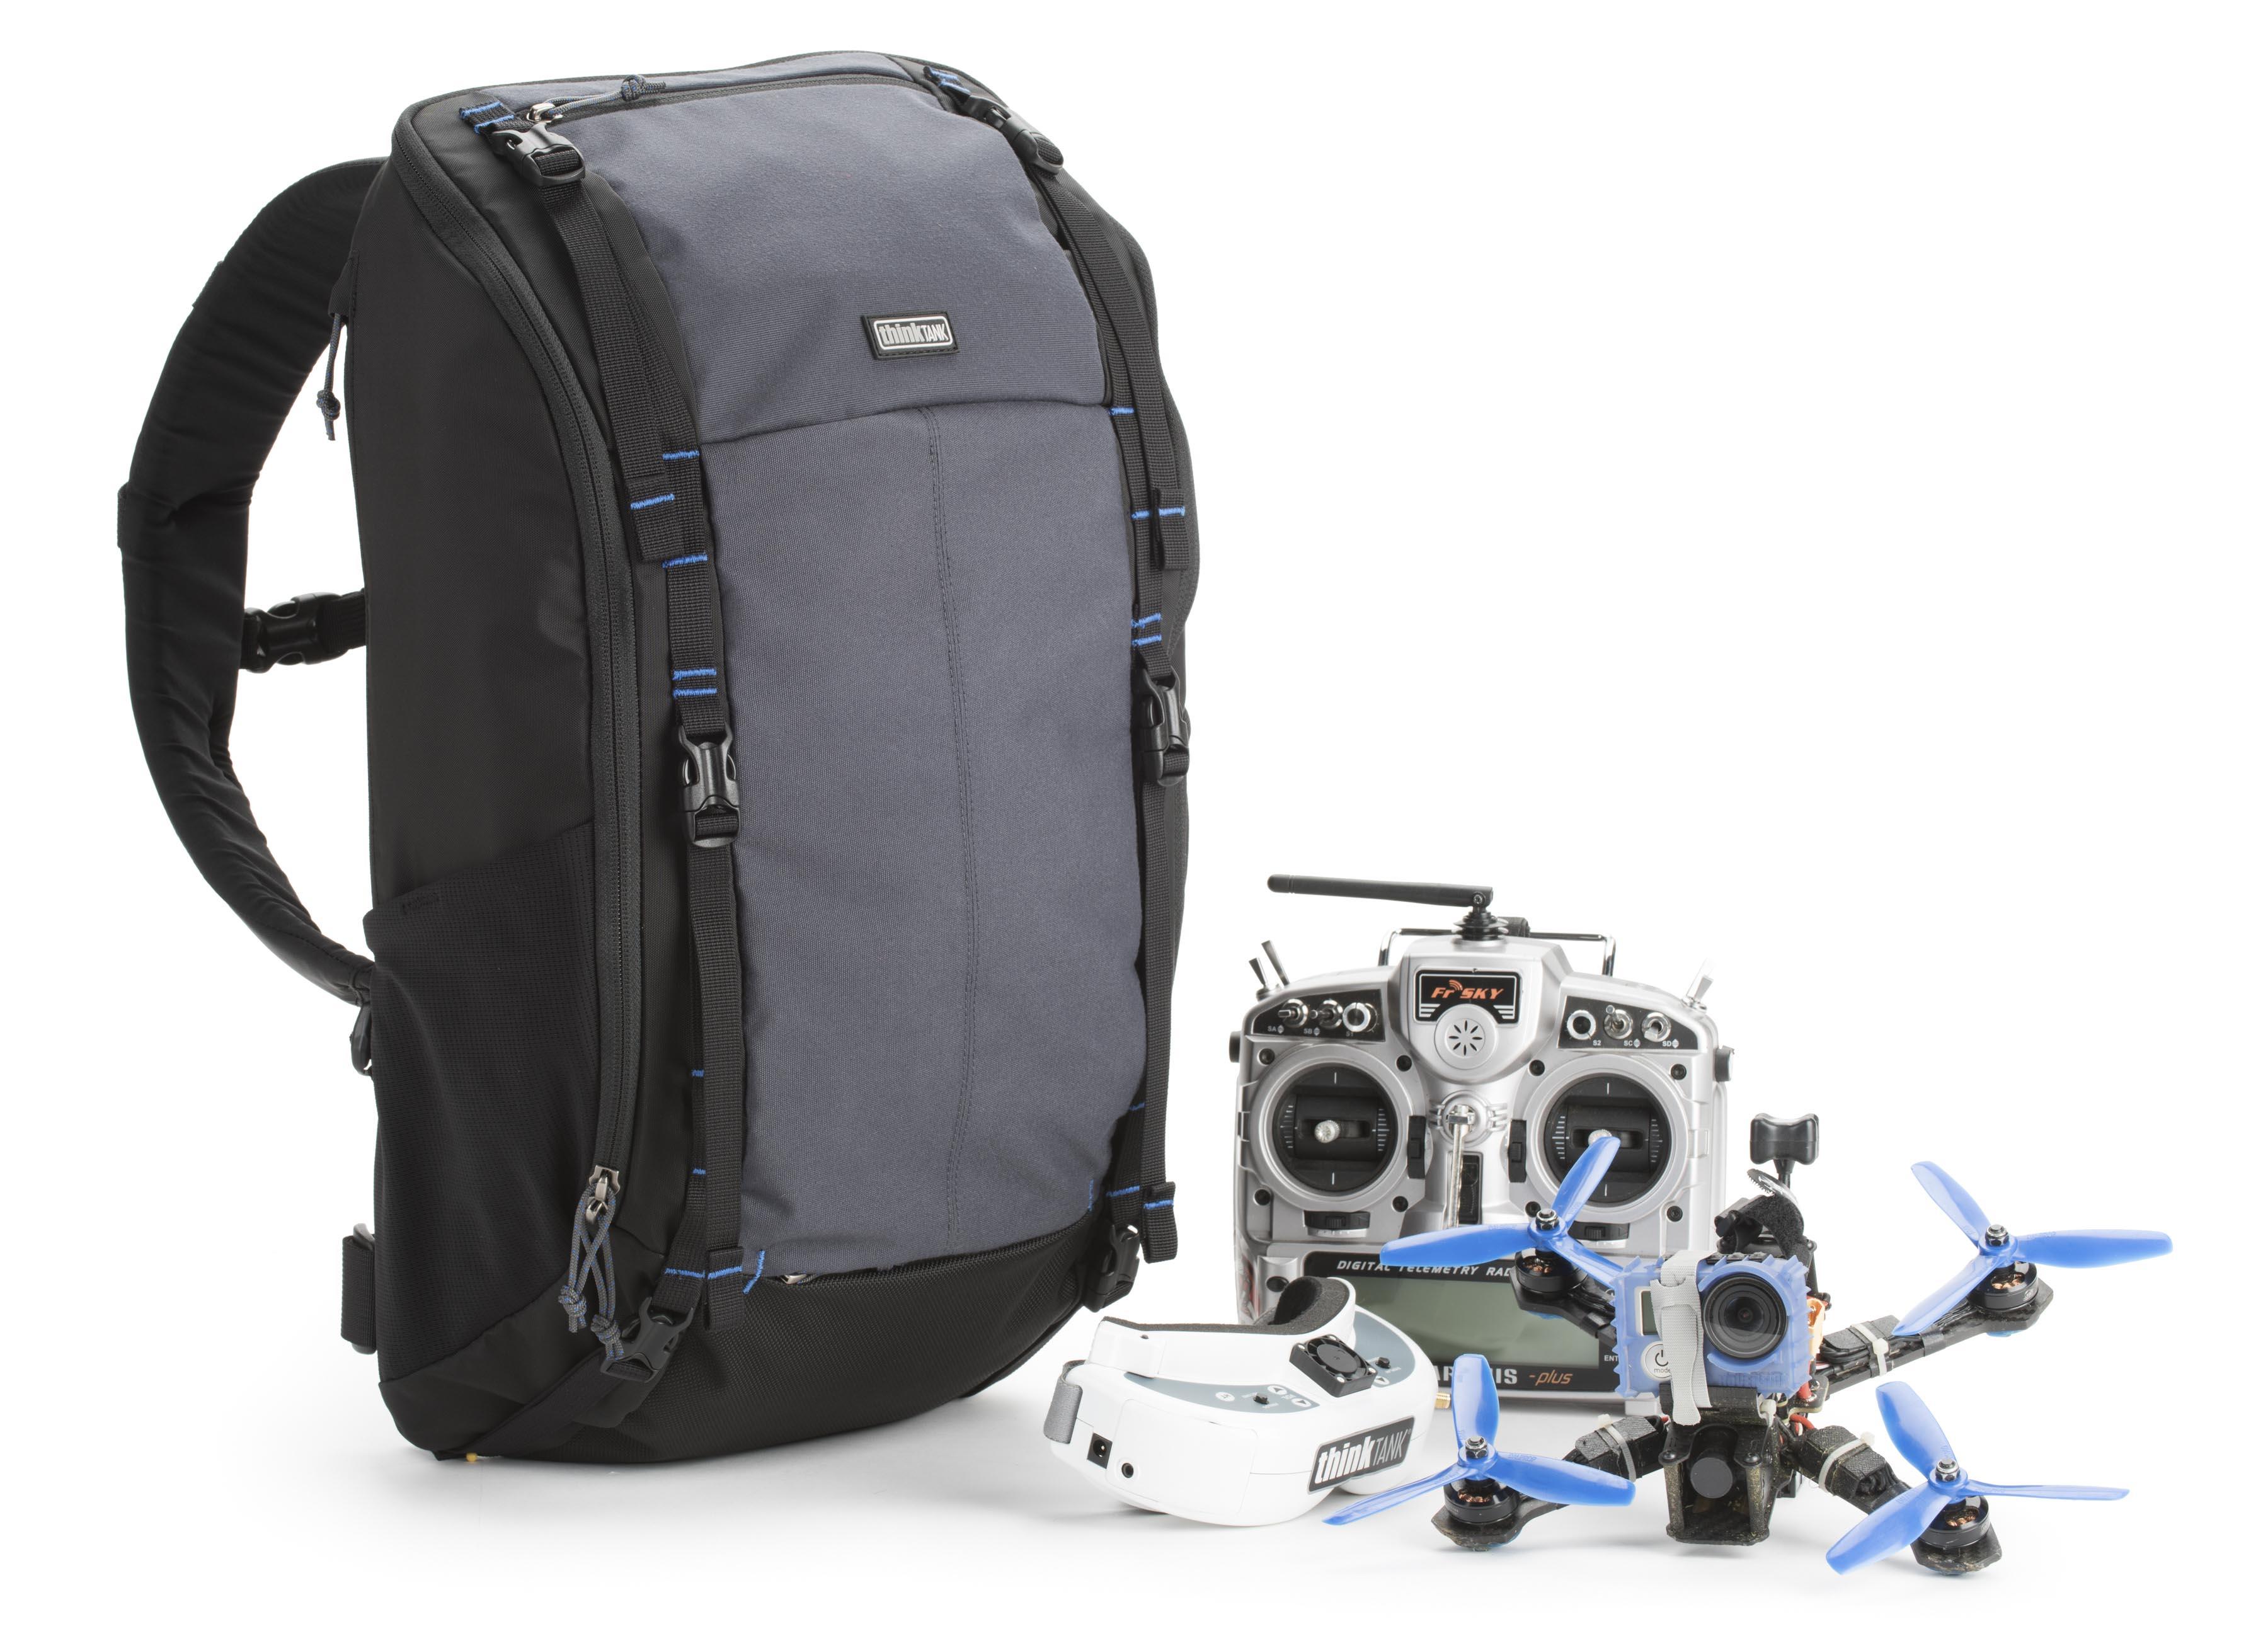 TT-420 Think Tank FPV Session Drone Backpack 